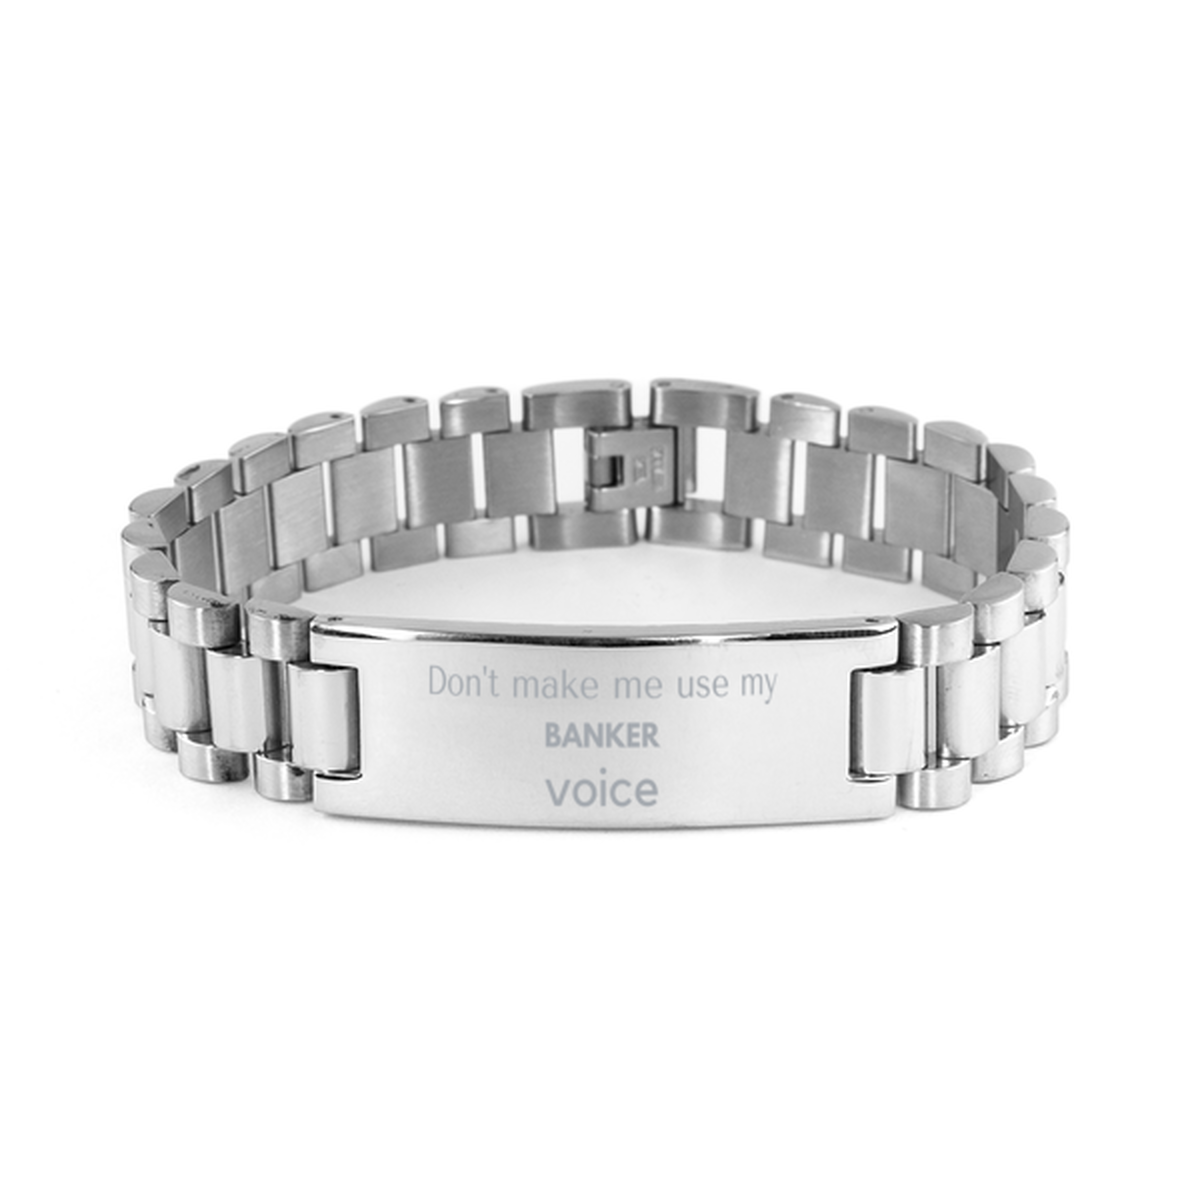 Don't make me use my Banker voice, Sarcasm Banker Gifts, Christmas Banker Ladder Stainless Steel Bracelet Birthday Unique Gifts For Banker Coworkers, Men, Women, Colleague, Friends